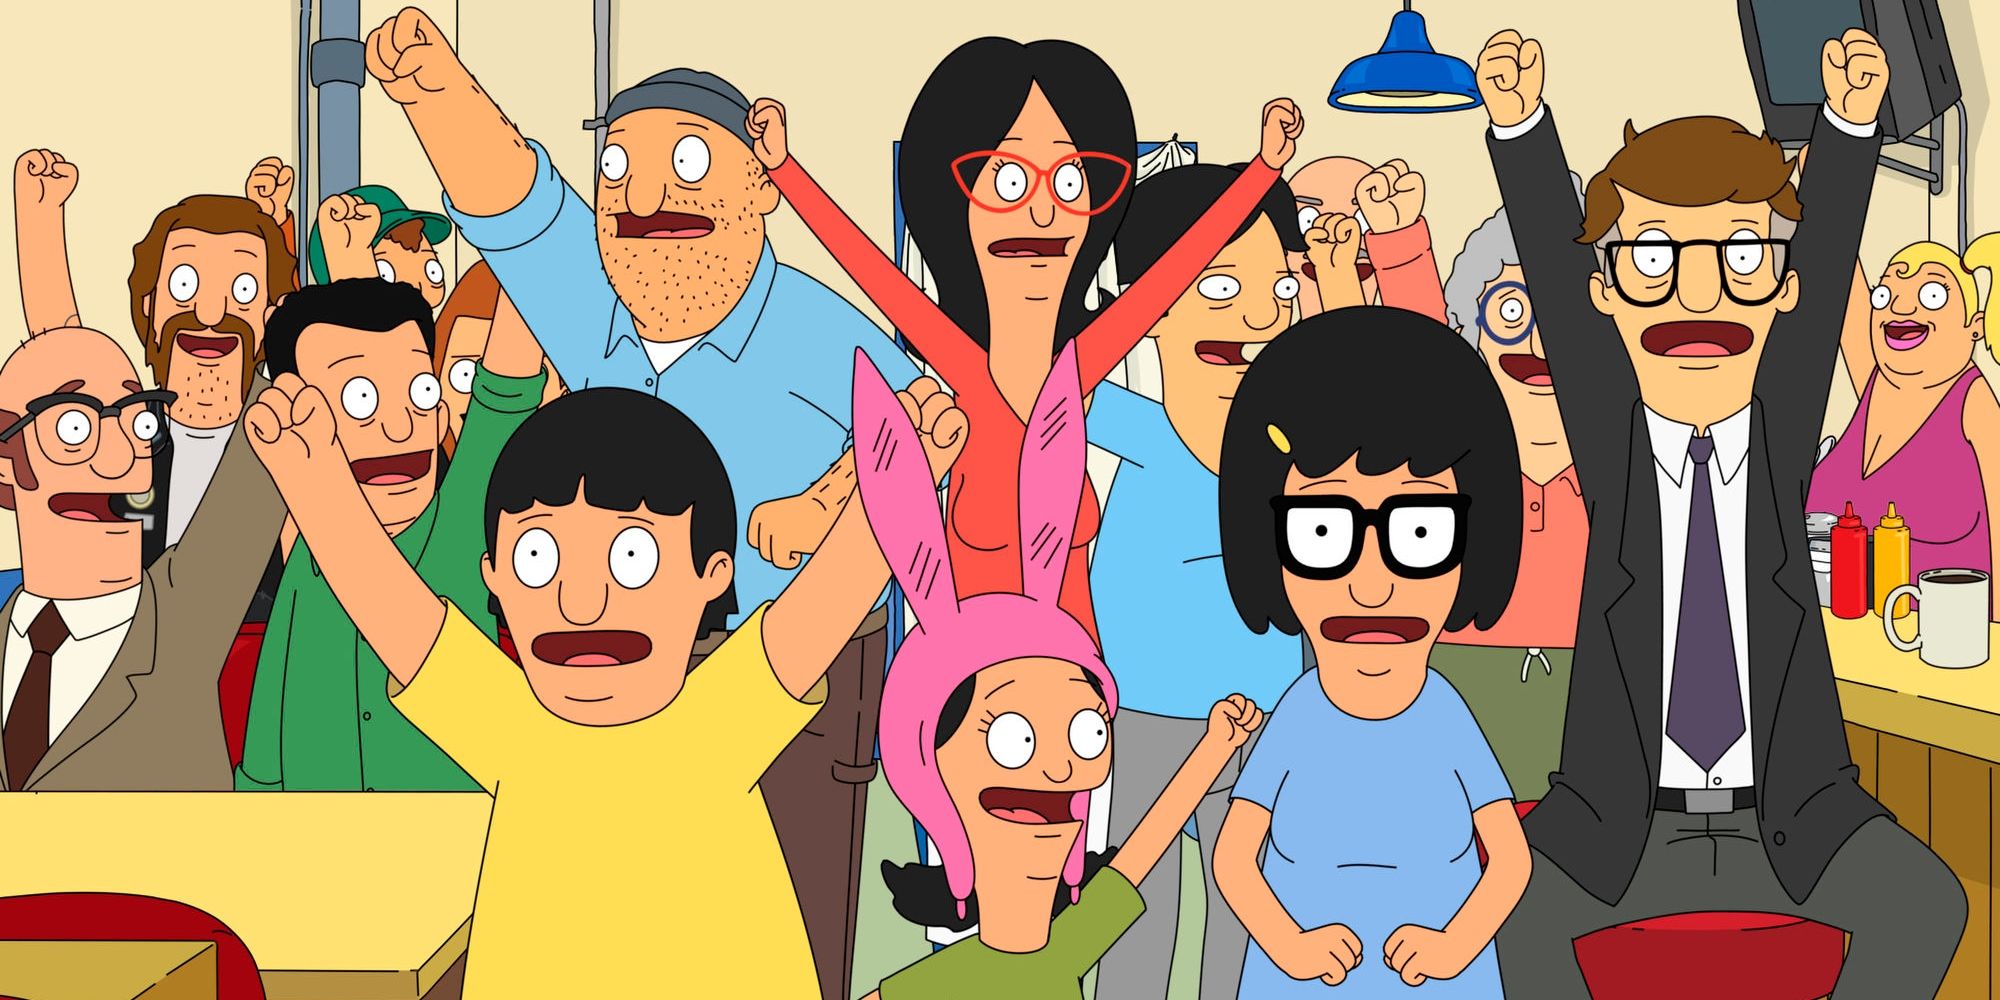 Bob's Burgers Season 6 The 100th Episode May Be The Show's Best